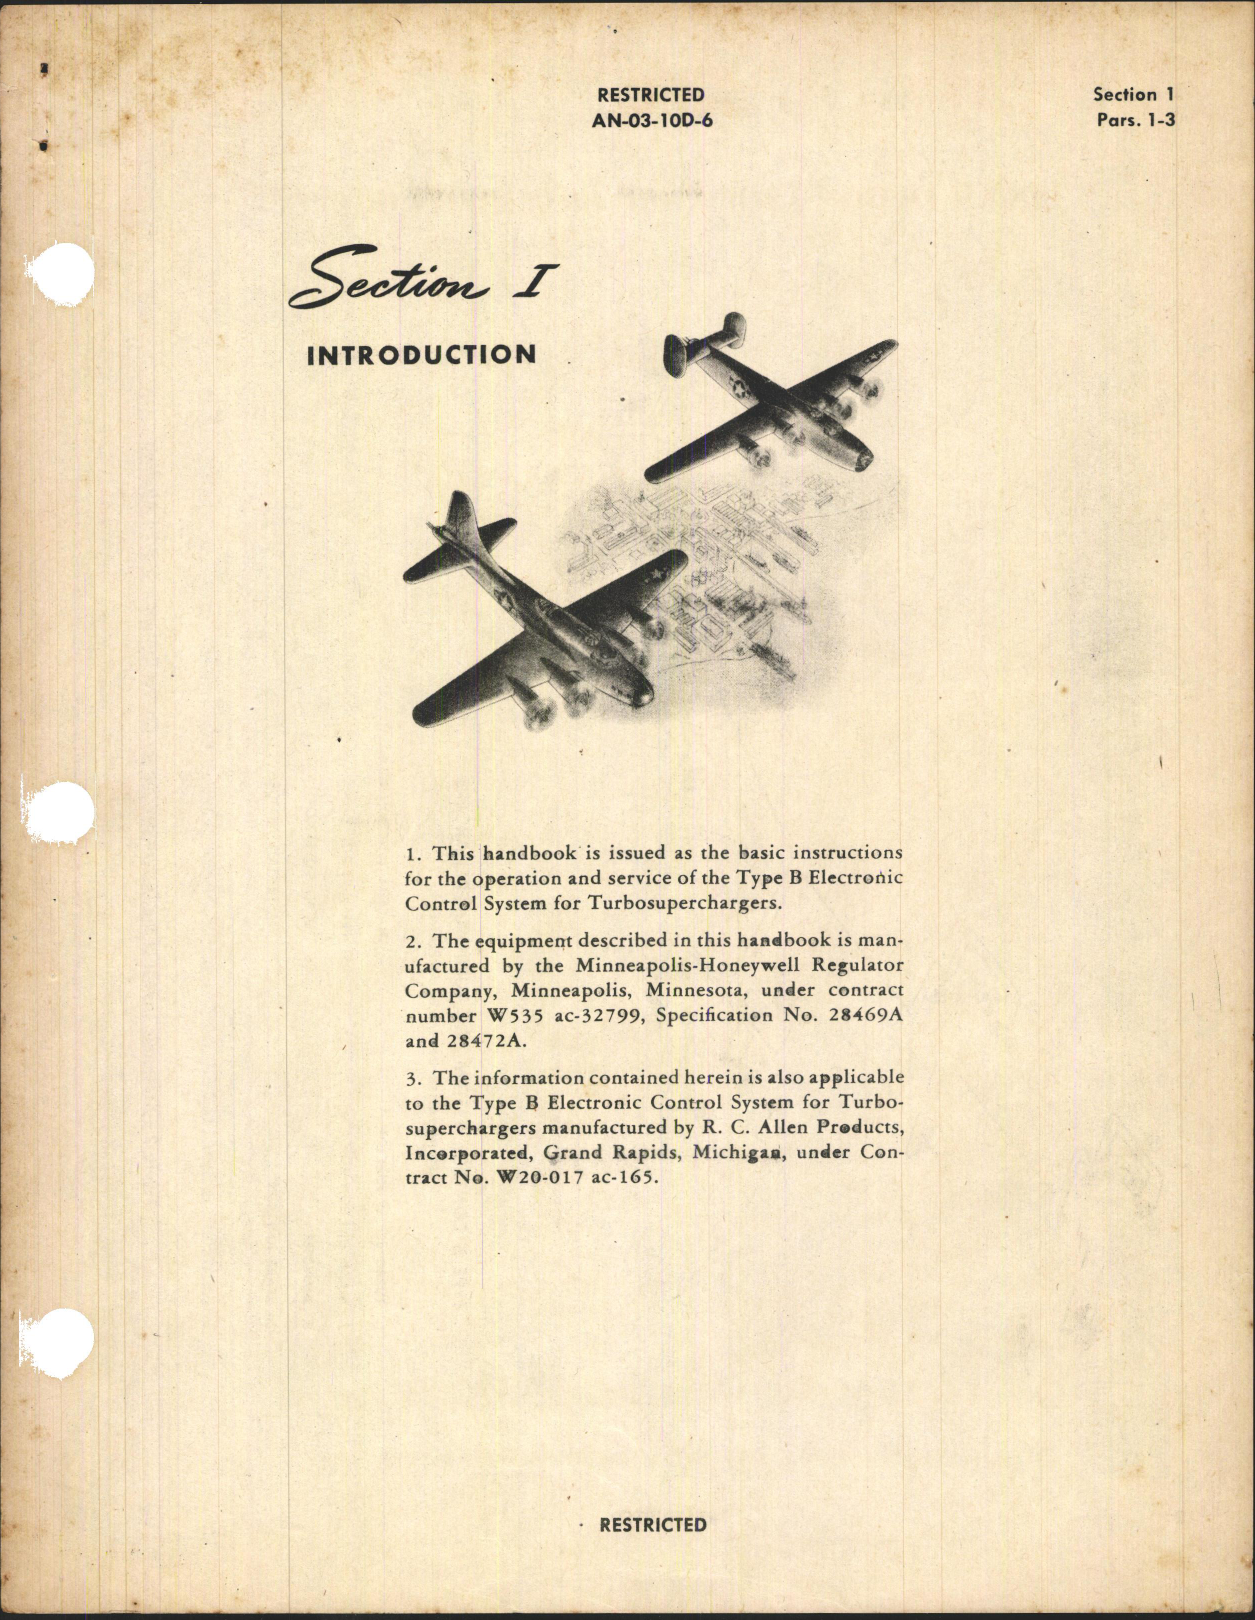 Sample page 5 from AirCorps Library document: Operation and Service Instructions for Type B Electronic Control System for Turbosuperchargers